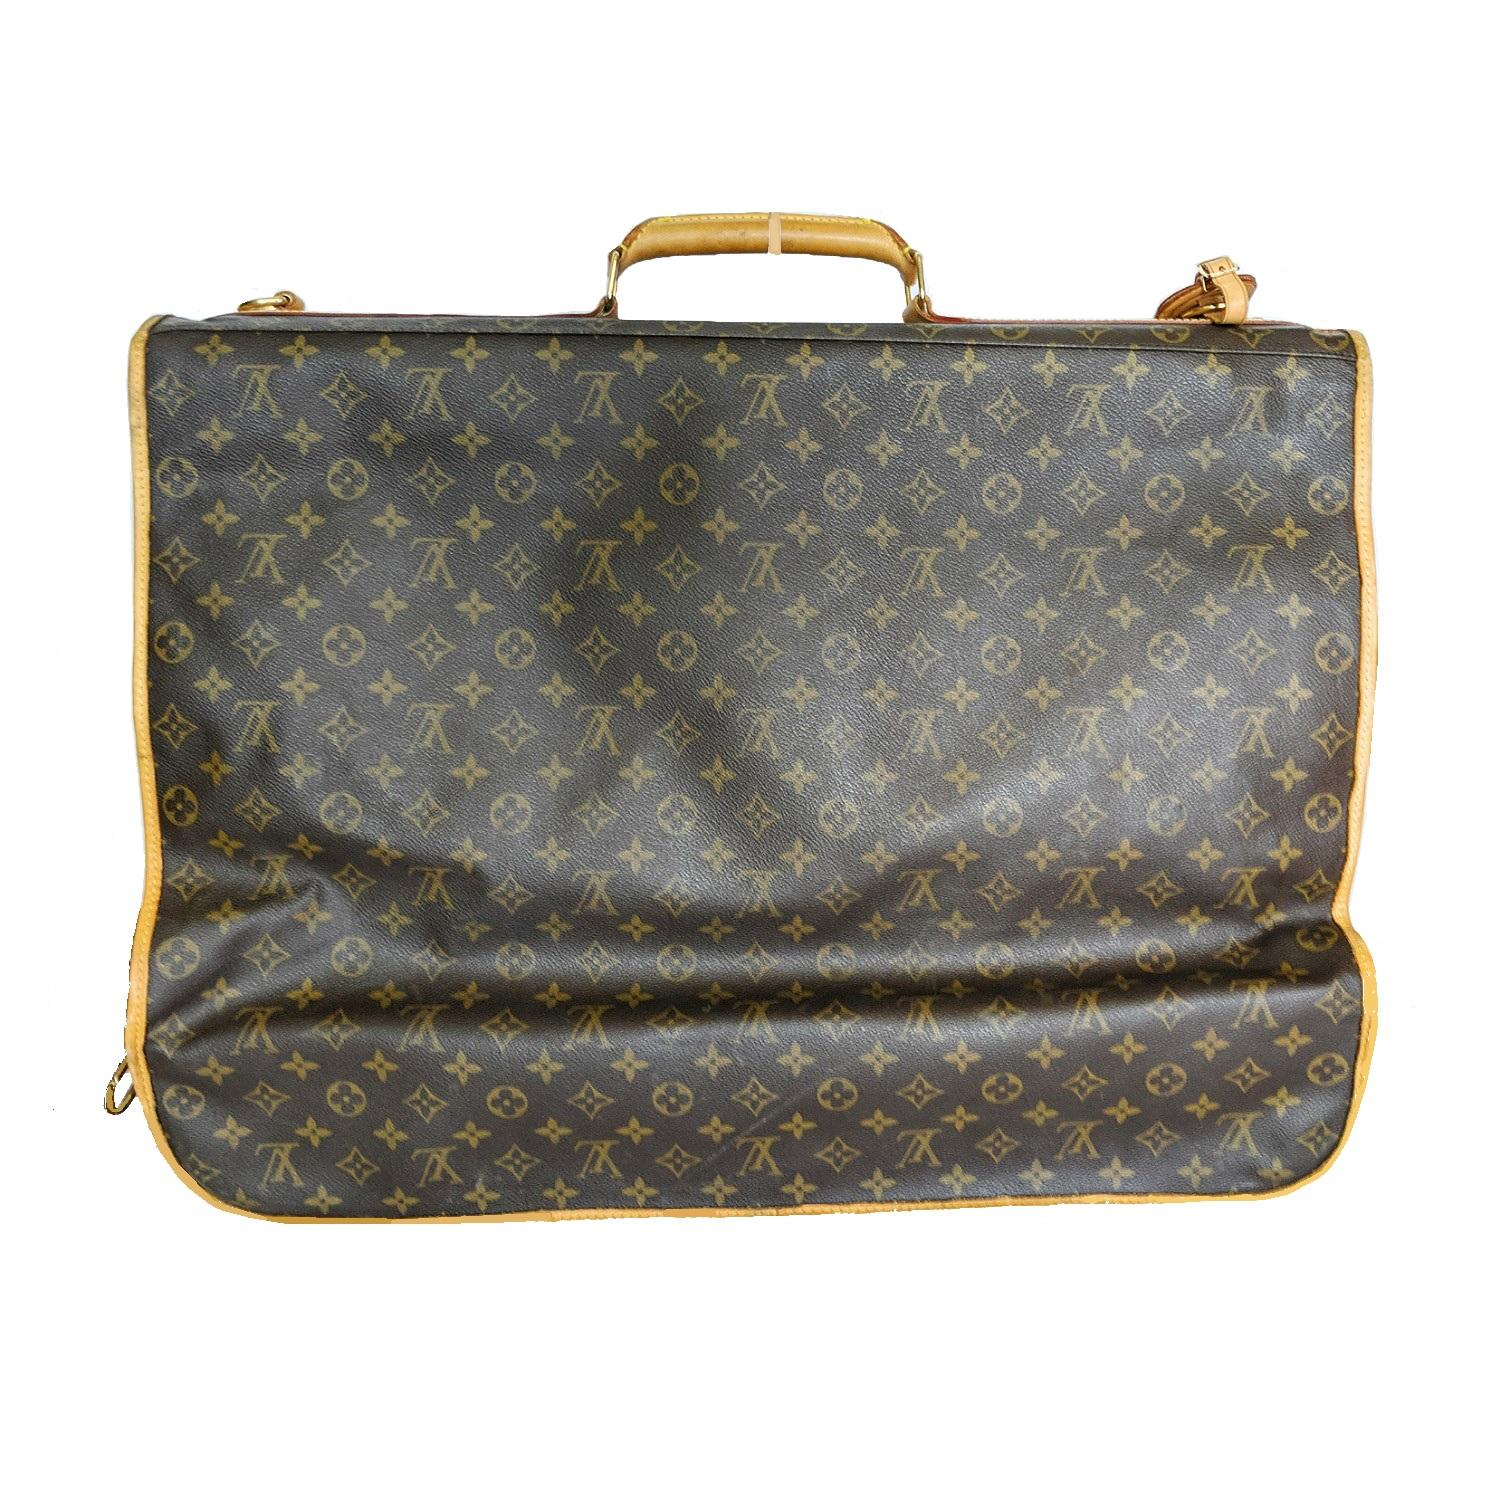 Brown and tan monogram coated canvas Louis Vuitton Portable Bandoulière with brass hardware, tan vachetta leather trim, detachable flat shoulder strap, single rolled top handle, hanging hook at top, exterior zip pocket at back, chocolate woven